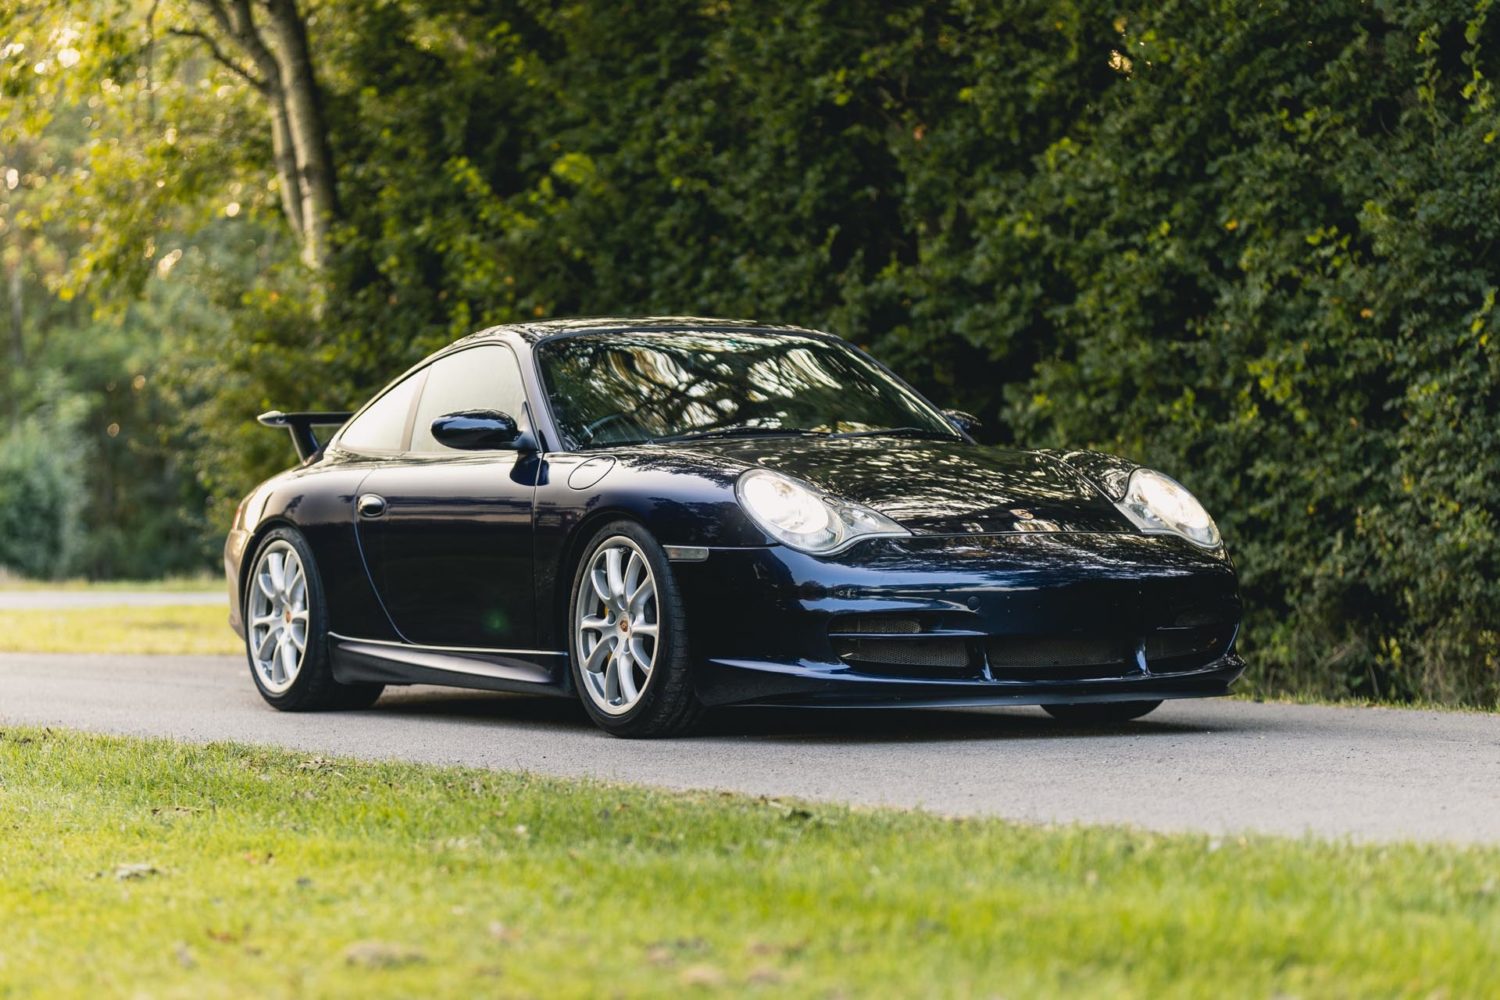 996.2 gt3 clubsport parked